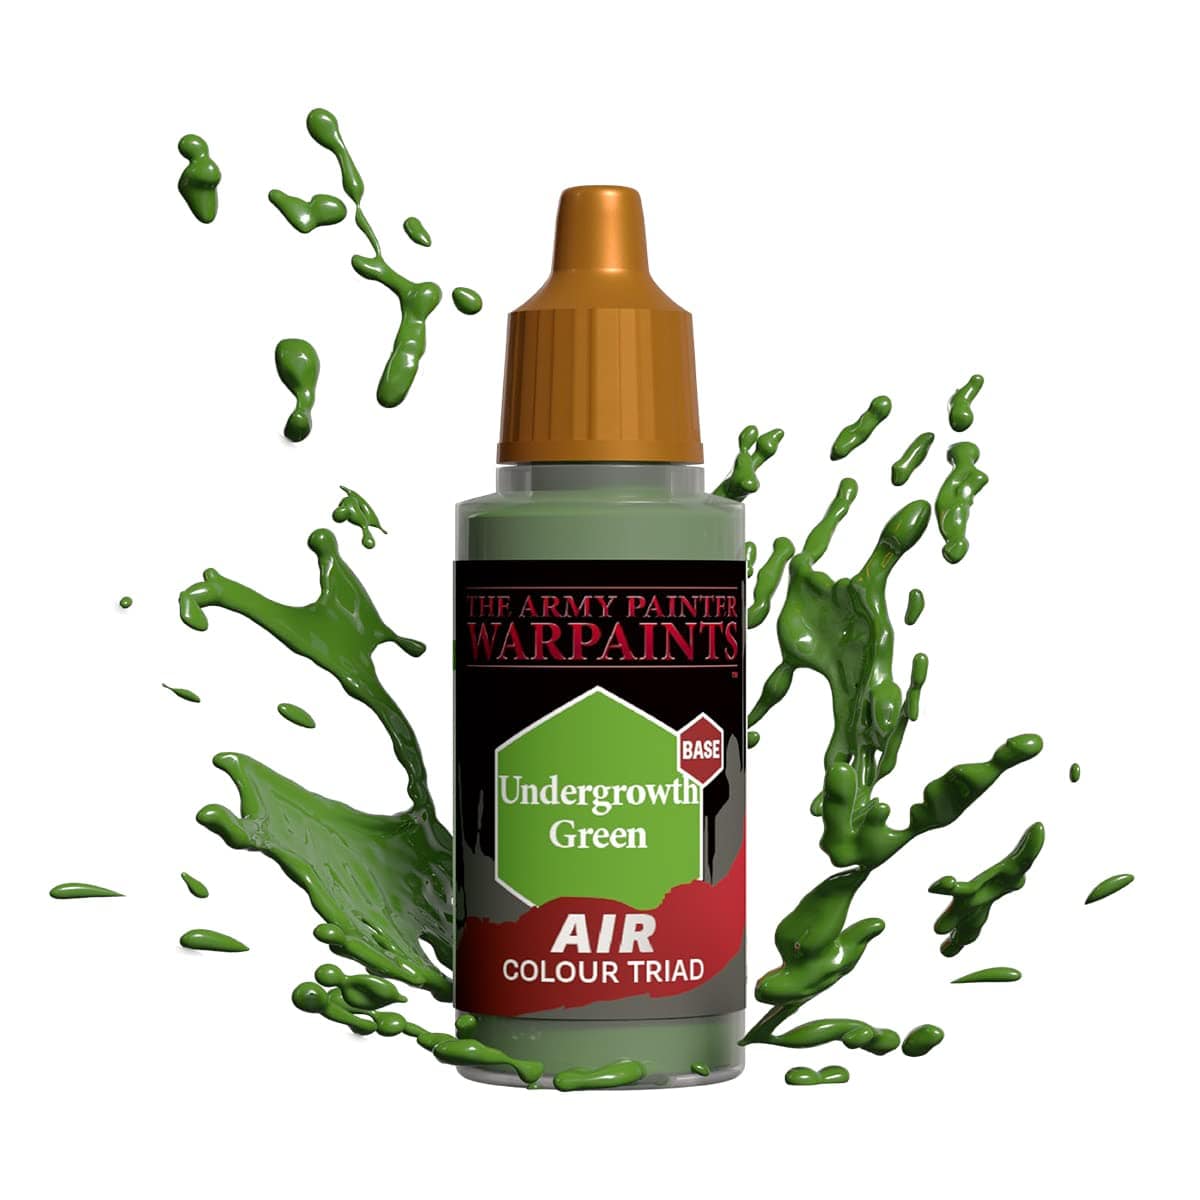 The Army Painter Accessories The Army Painter Warpaints Air: Undergrowth Green 18ml